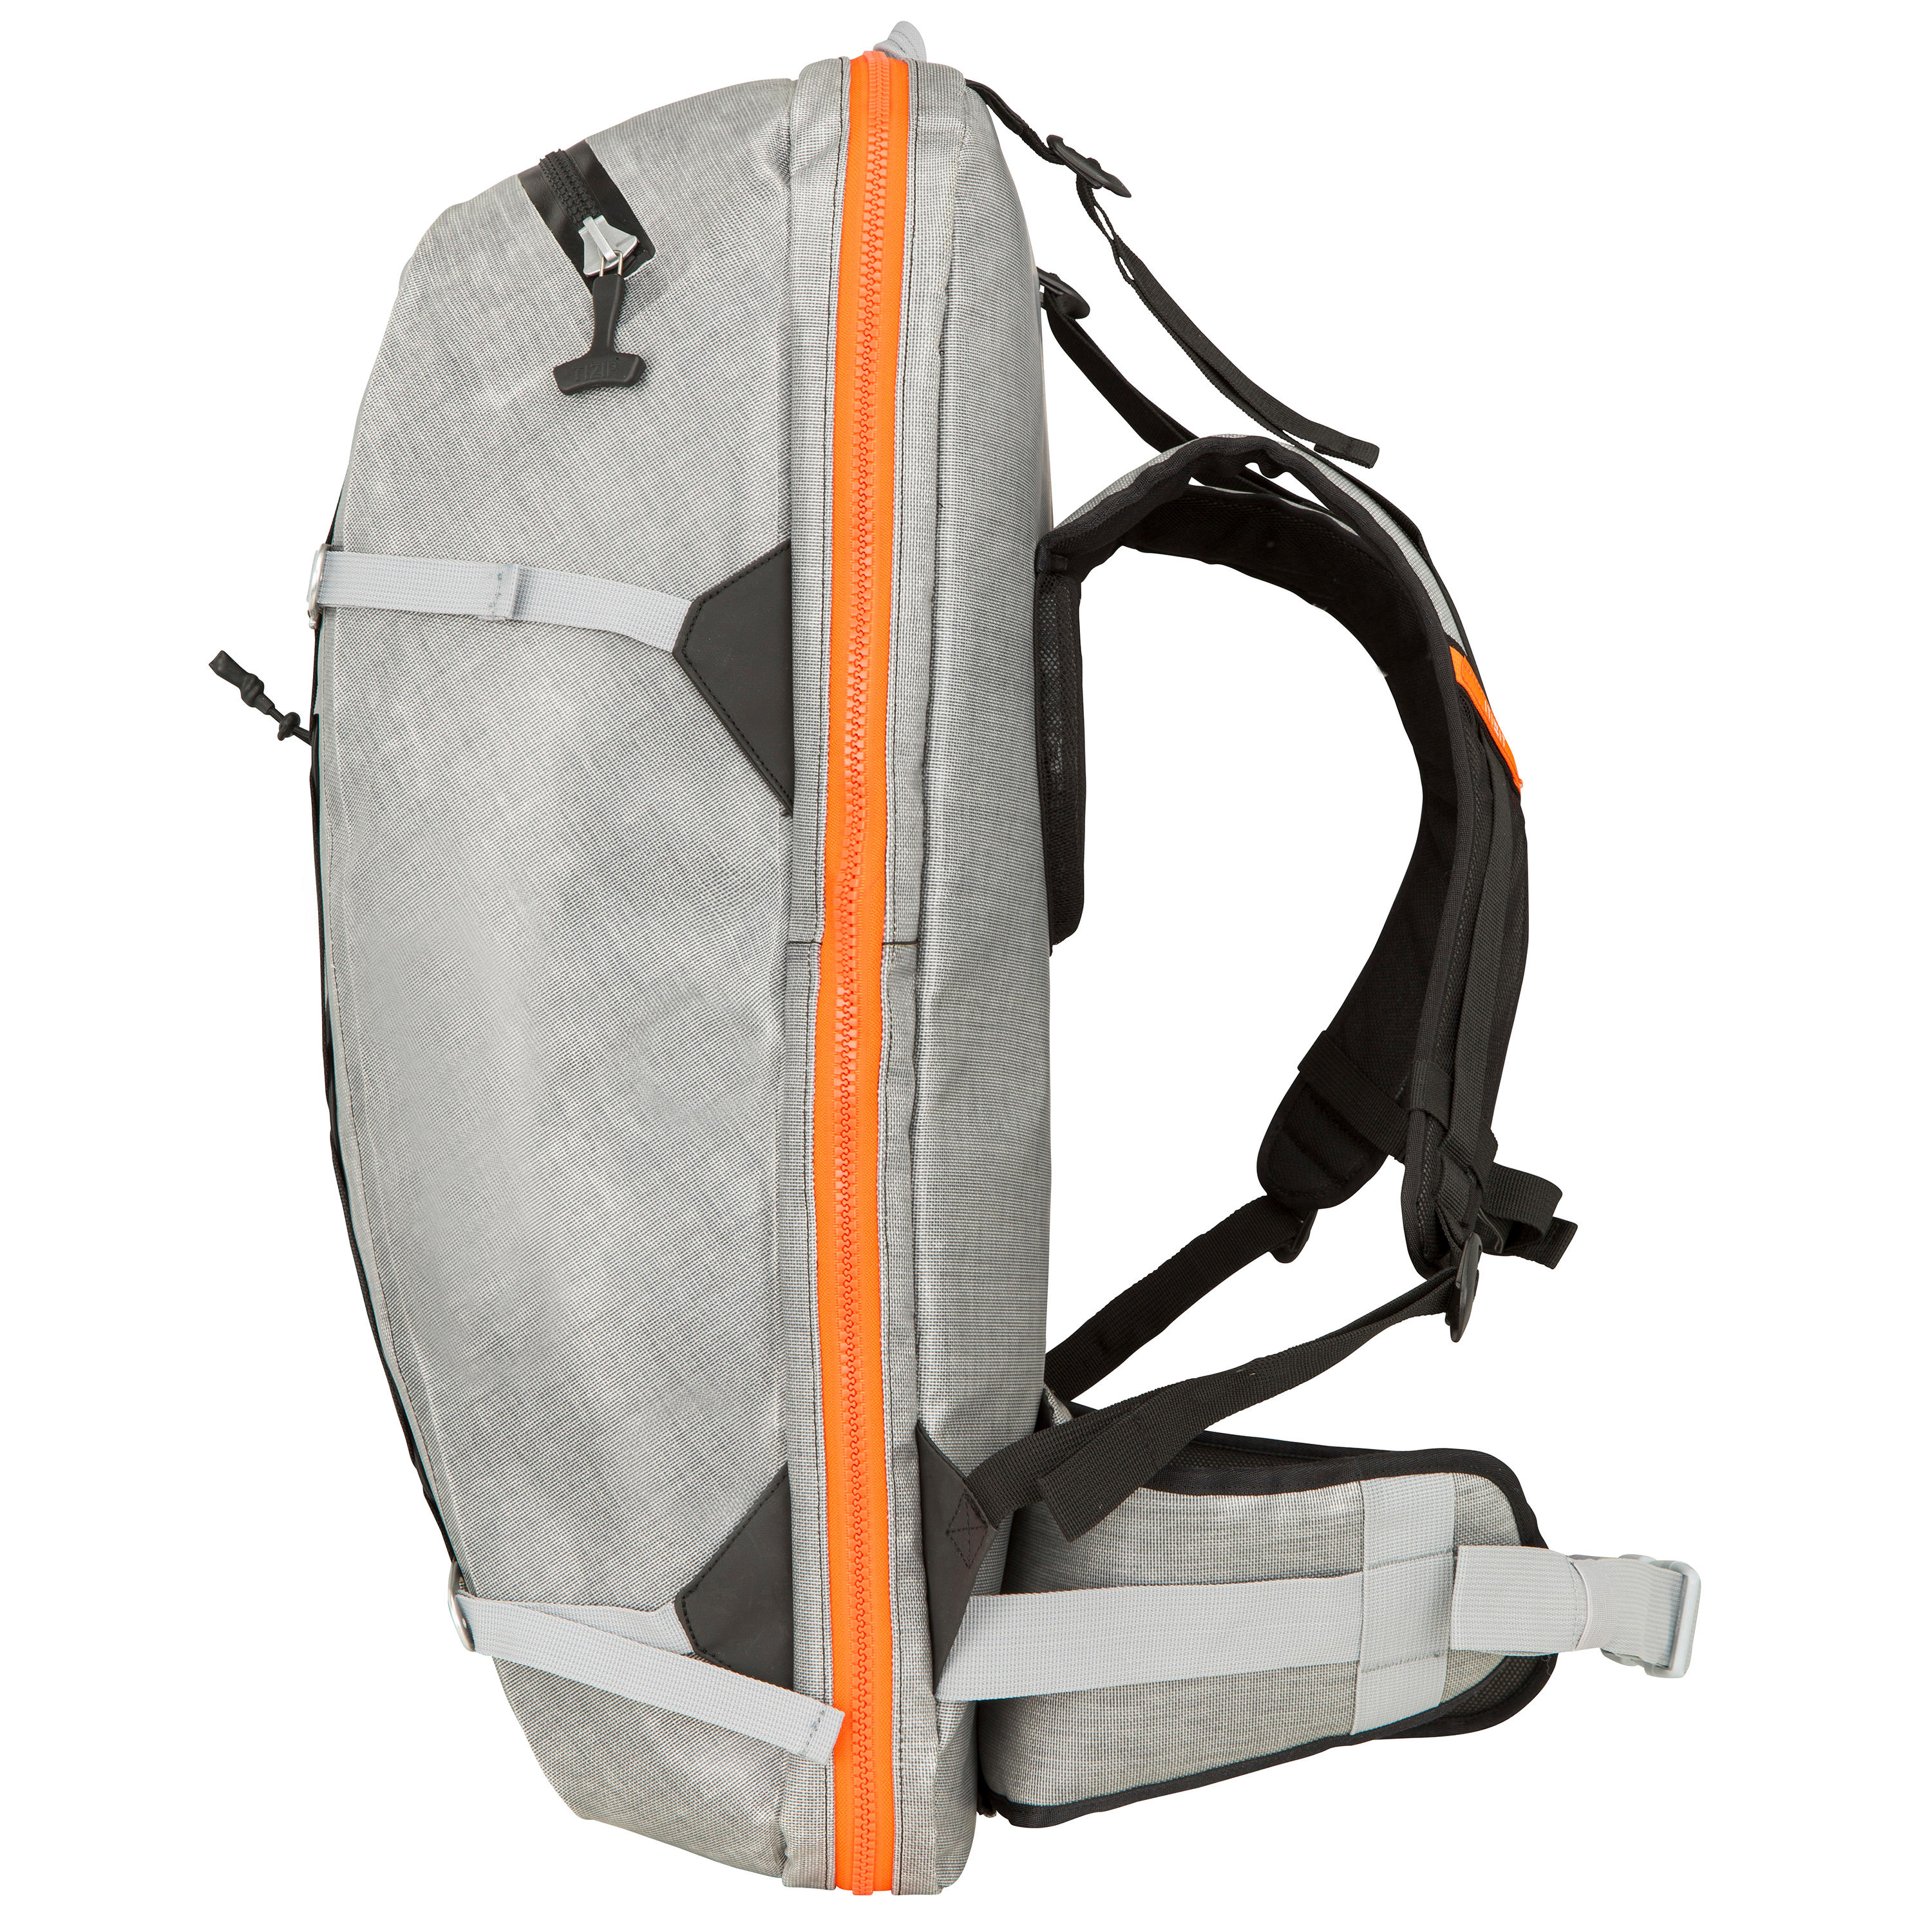 Stand-Up Paddle Convertible Waterproof Backpack 5/21